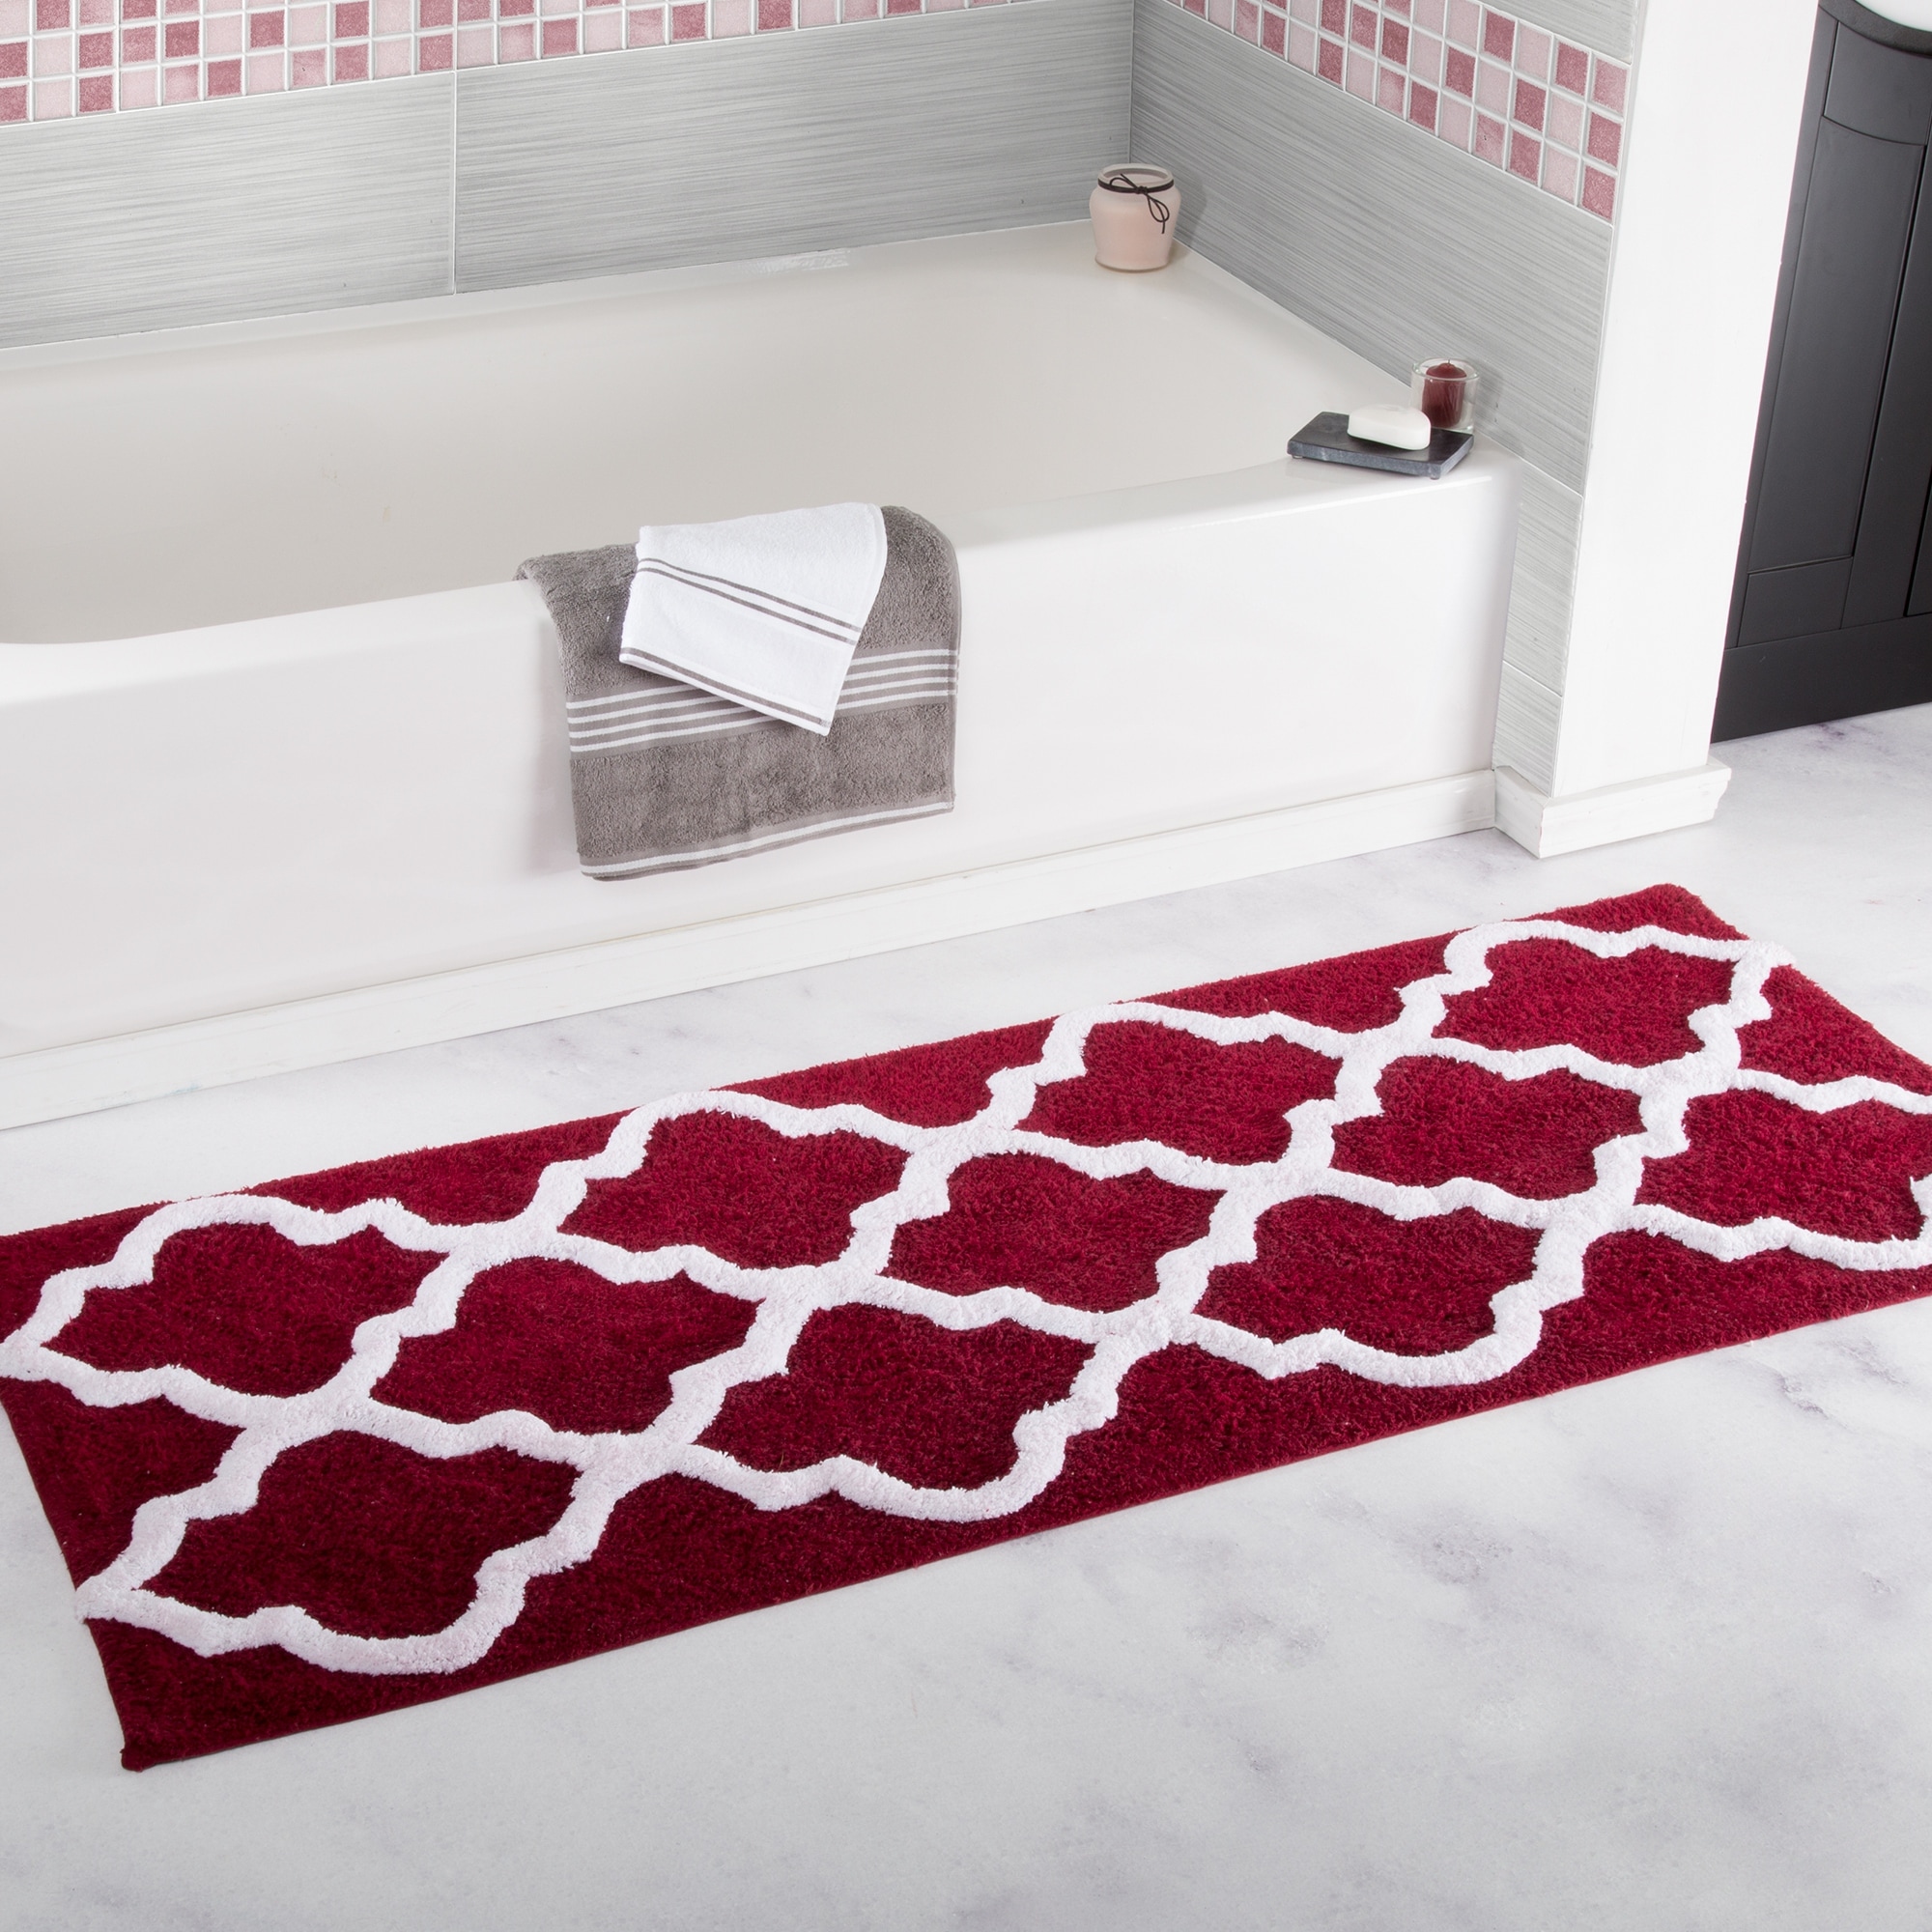 https://ak1.ostkcdn.com/images/products/is/images/direct/0ed2f514997fb8706e8677635ce3aea7fa68450c/24x60-Inch-Bathmat-with-Trellis-Pattern-and-Non-Slip-Base---Machine-Washable-Bathroom-Rugs-by-Lavish-Home-%28Burgundy%29.jpg